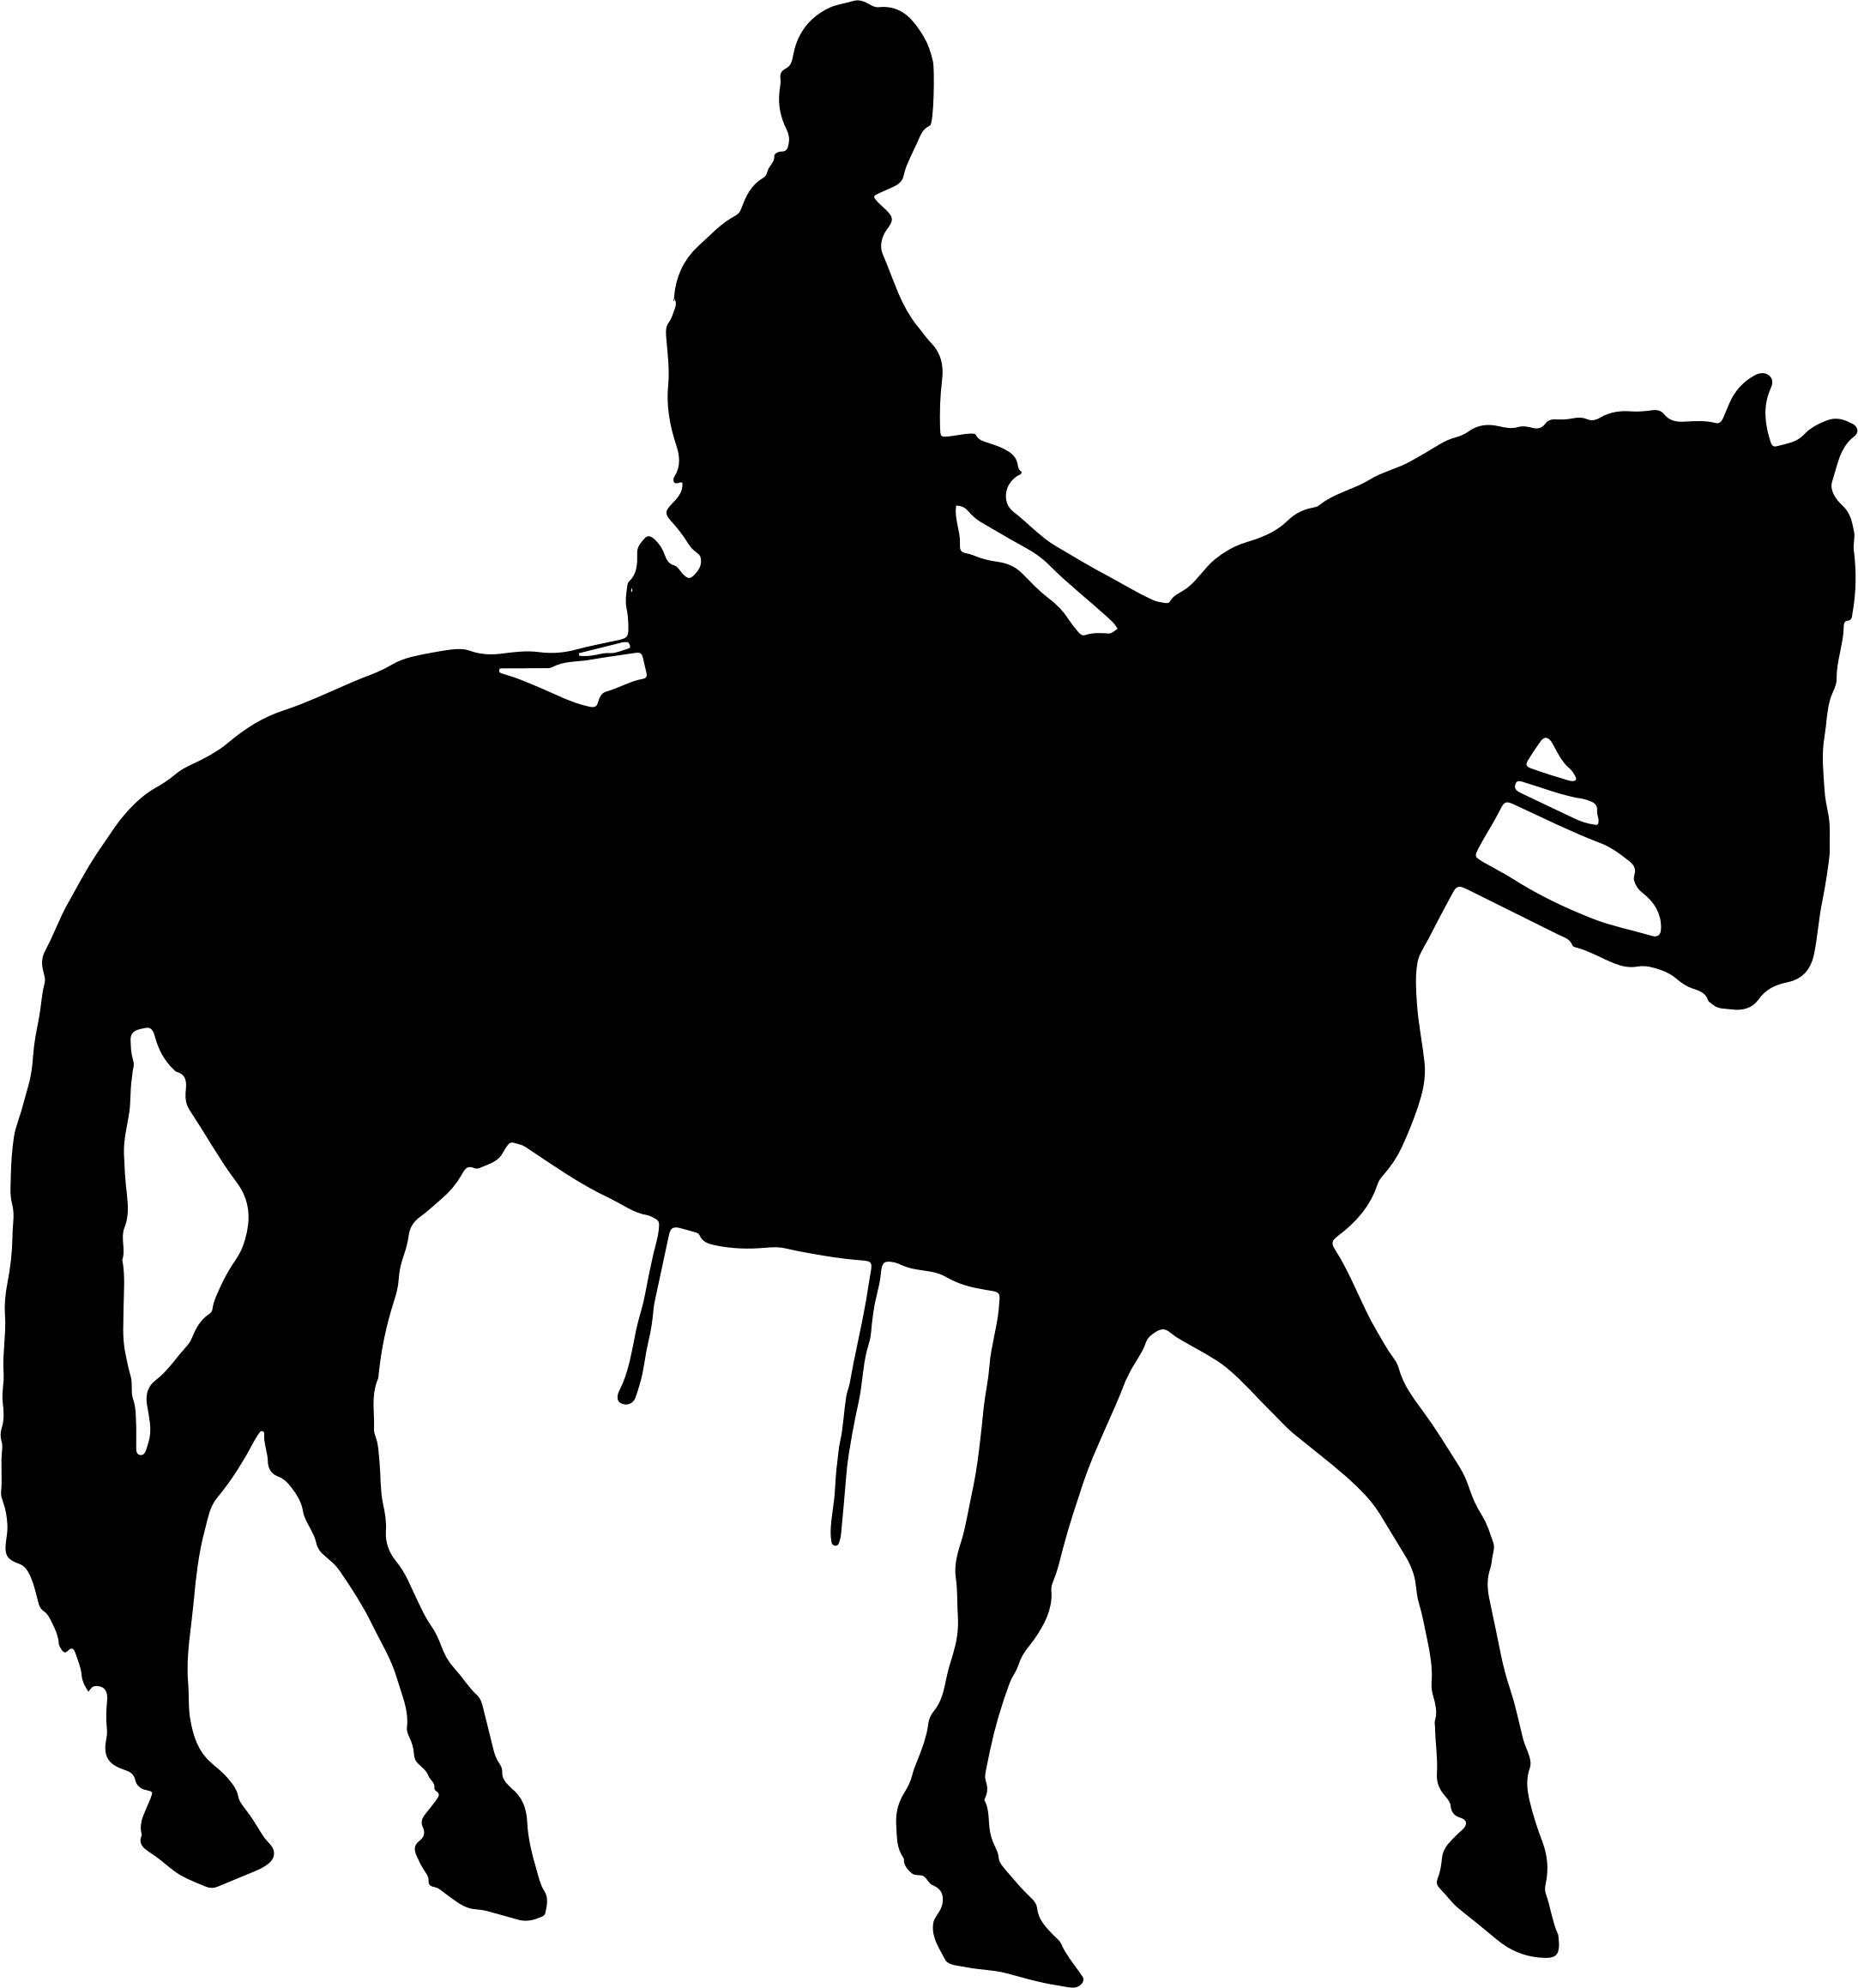 Man Riding Horse Silhouette png